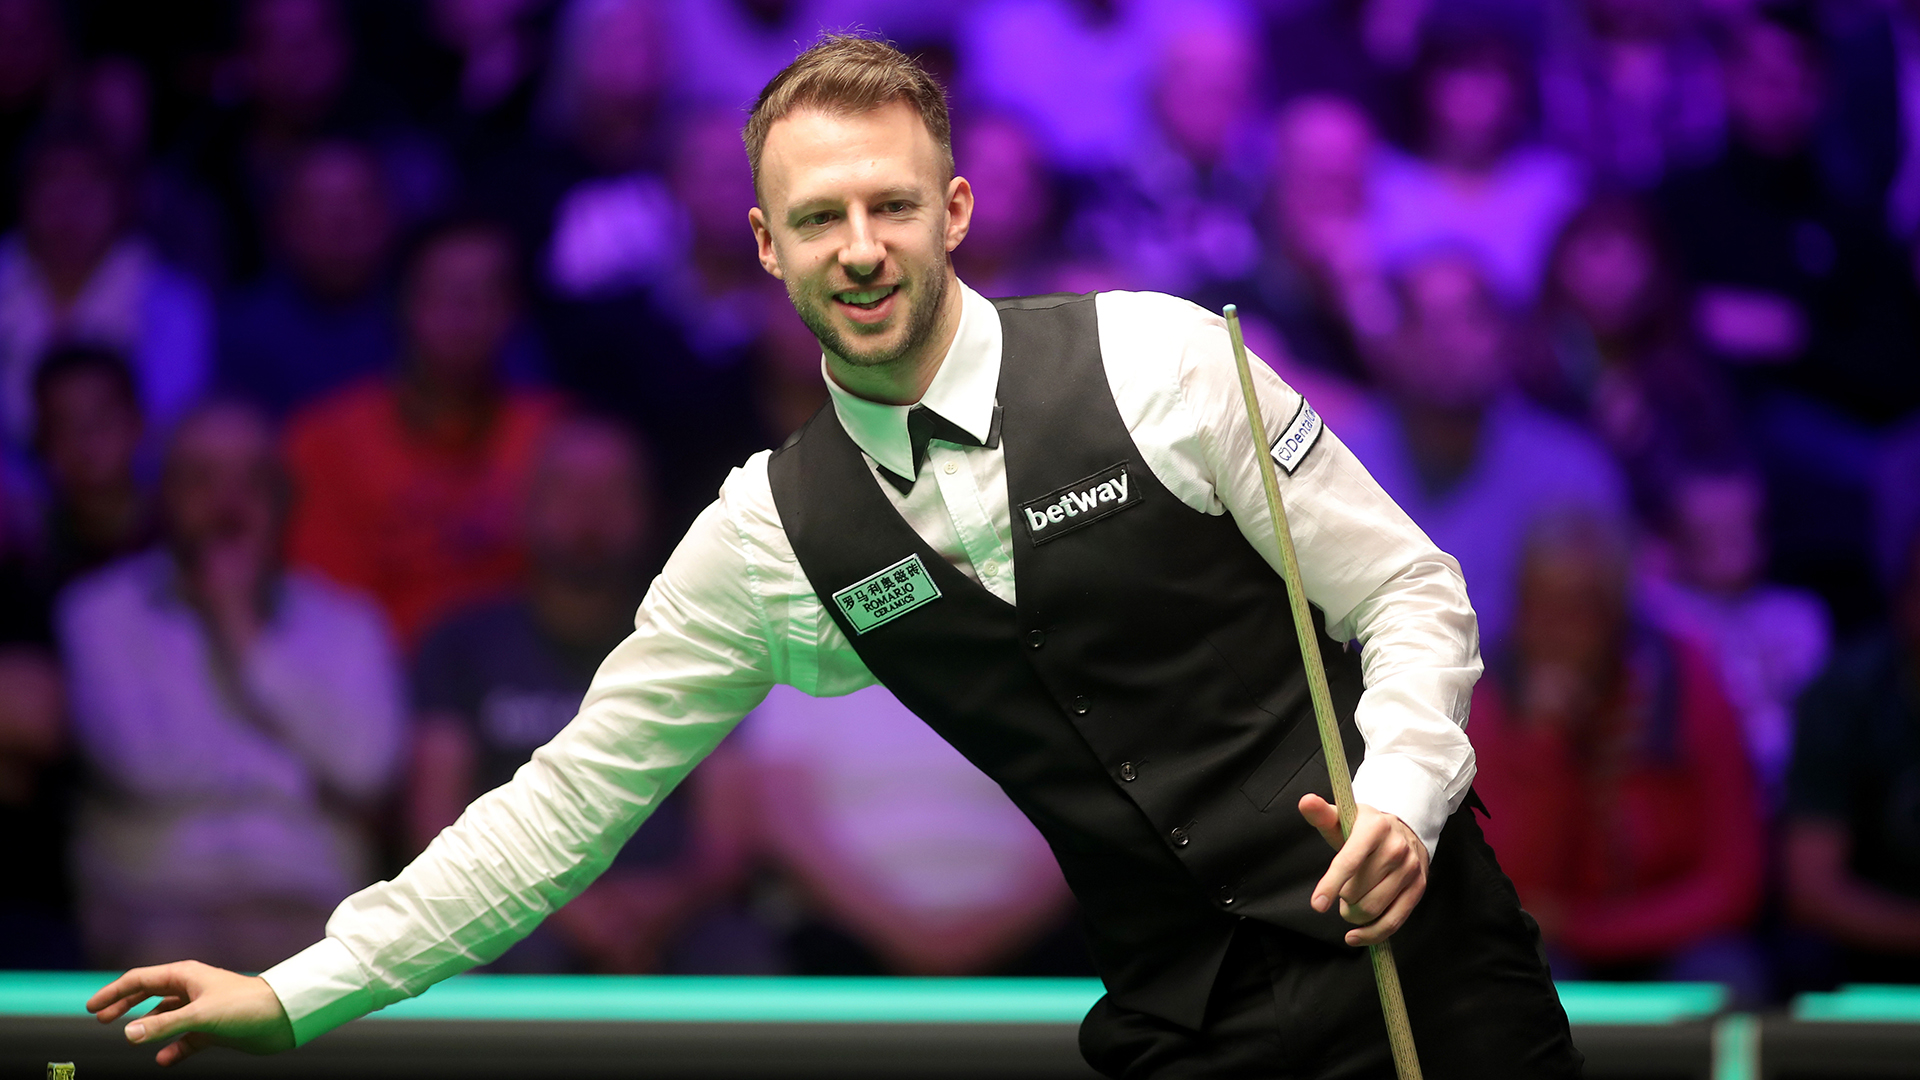 Snooker results Judd Trump sees off Michael Holt in Players Championship; Neil Robertson crashes out in 6-4 defeat to Joe Perry